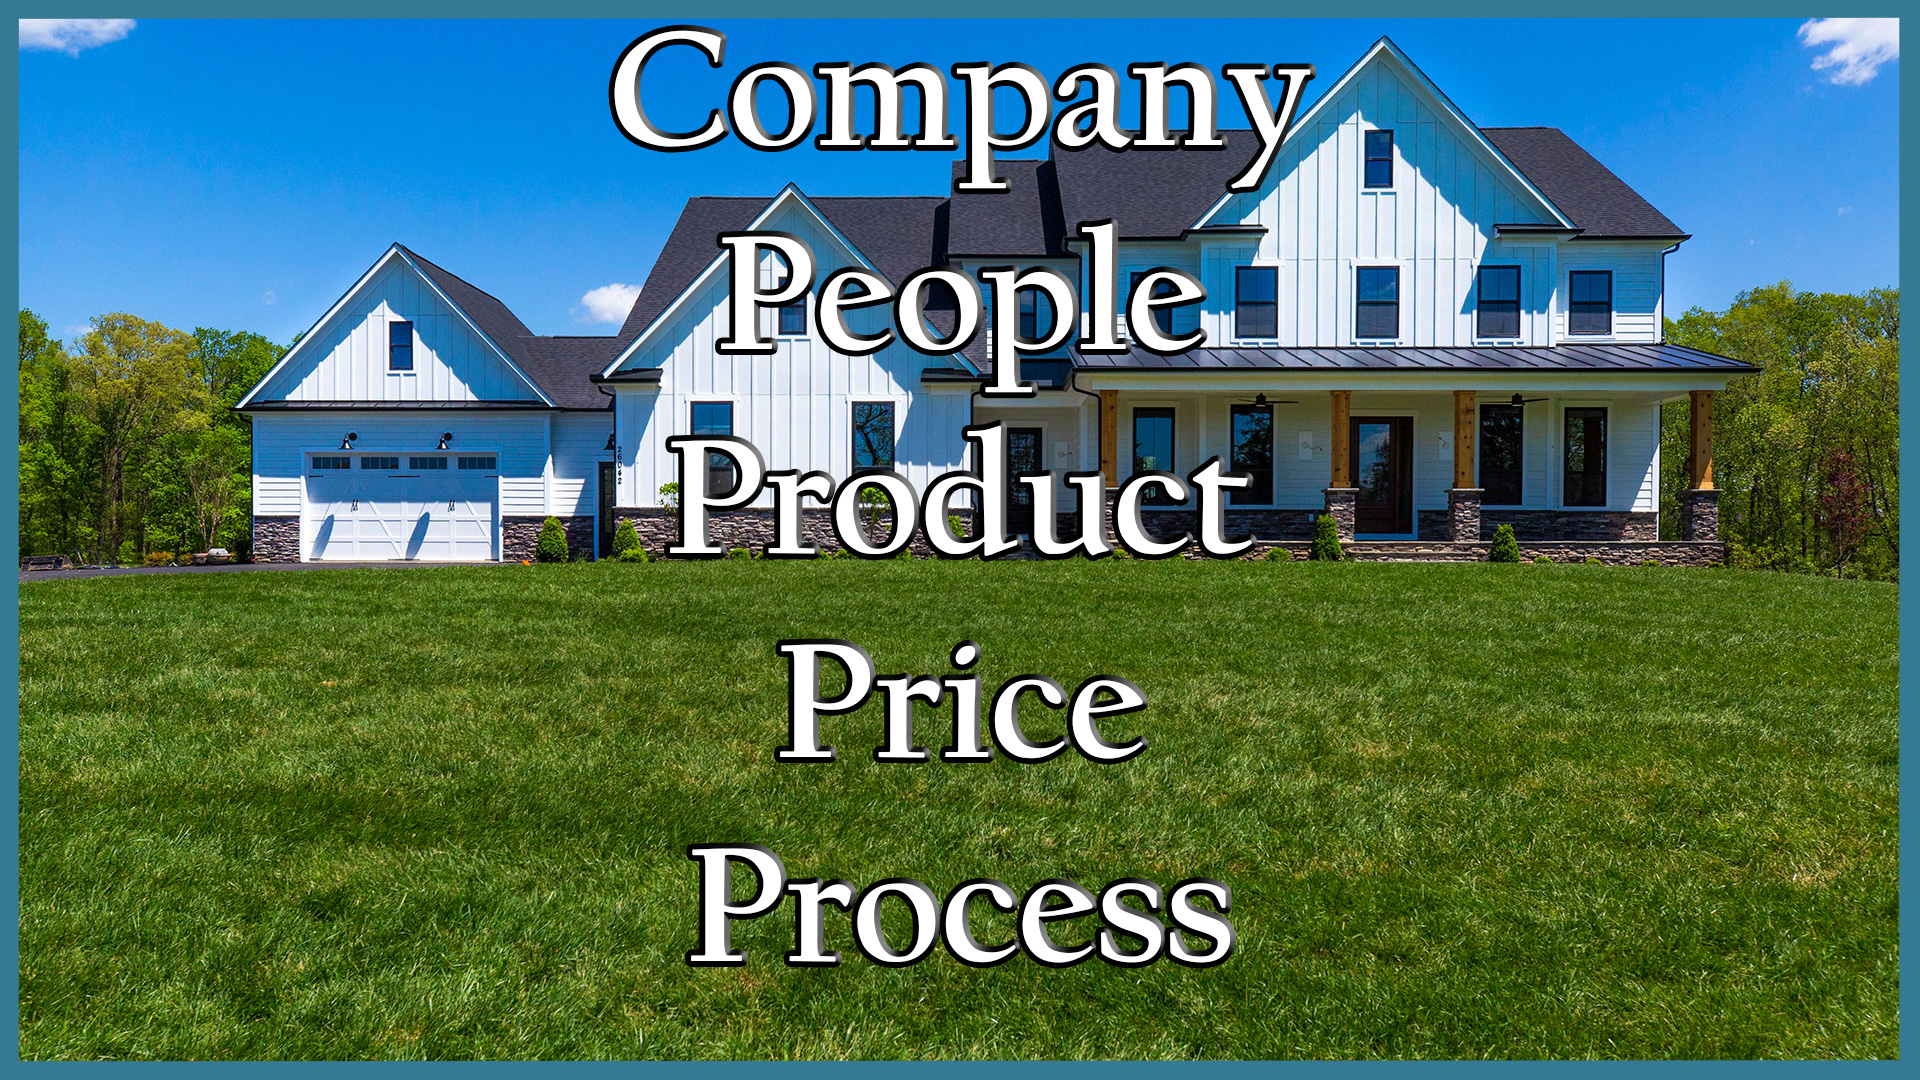 Company People Product Price Process